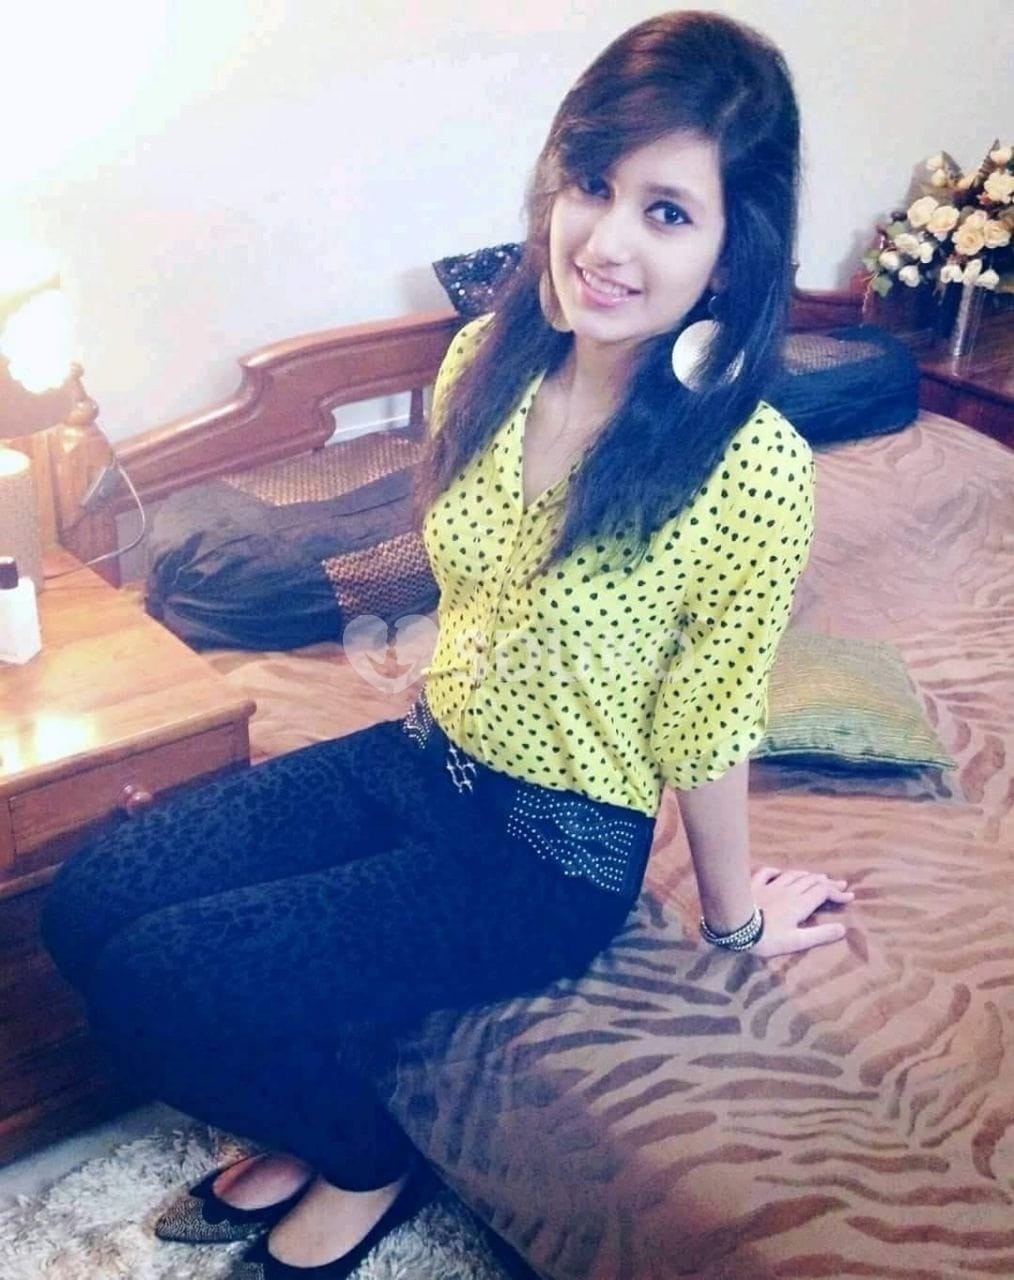 Call girl in Chandigarh self and secure high profile girl available...